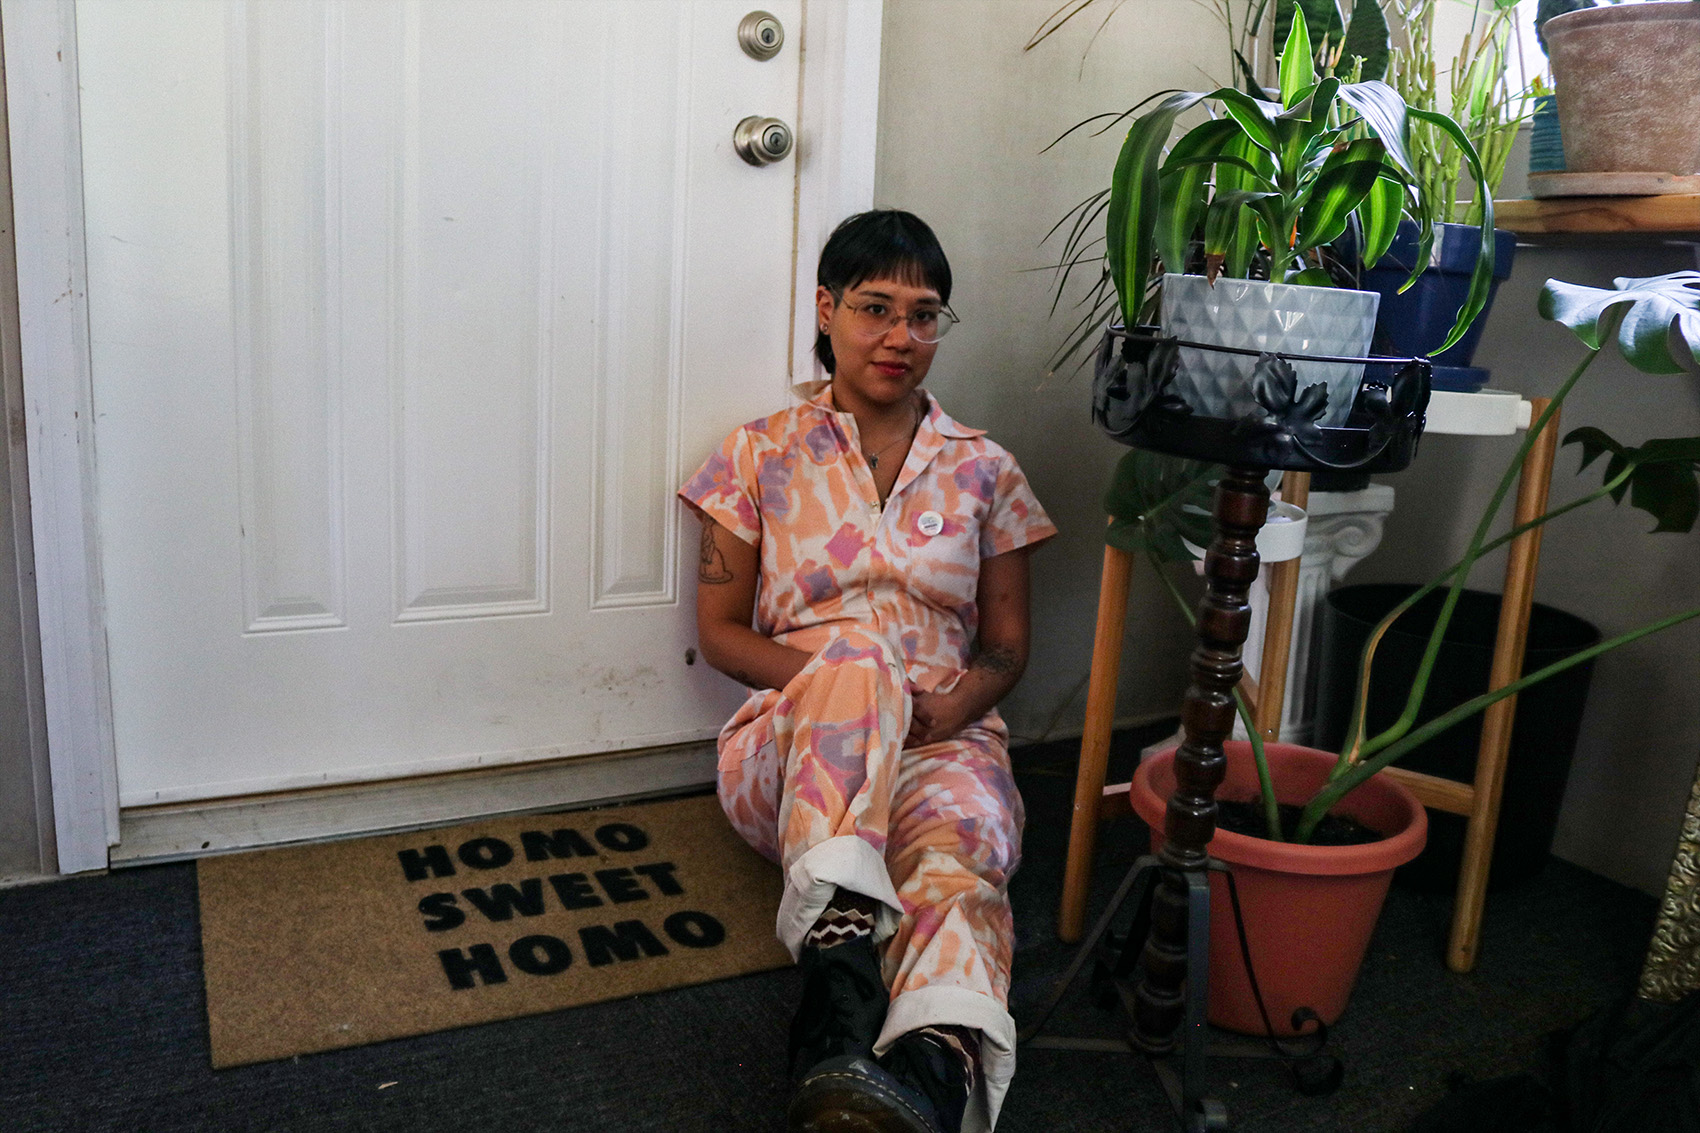 Foote sits near a doormat that reads: “Homo Sweet Homo.”